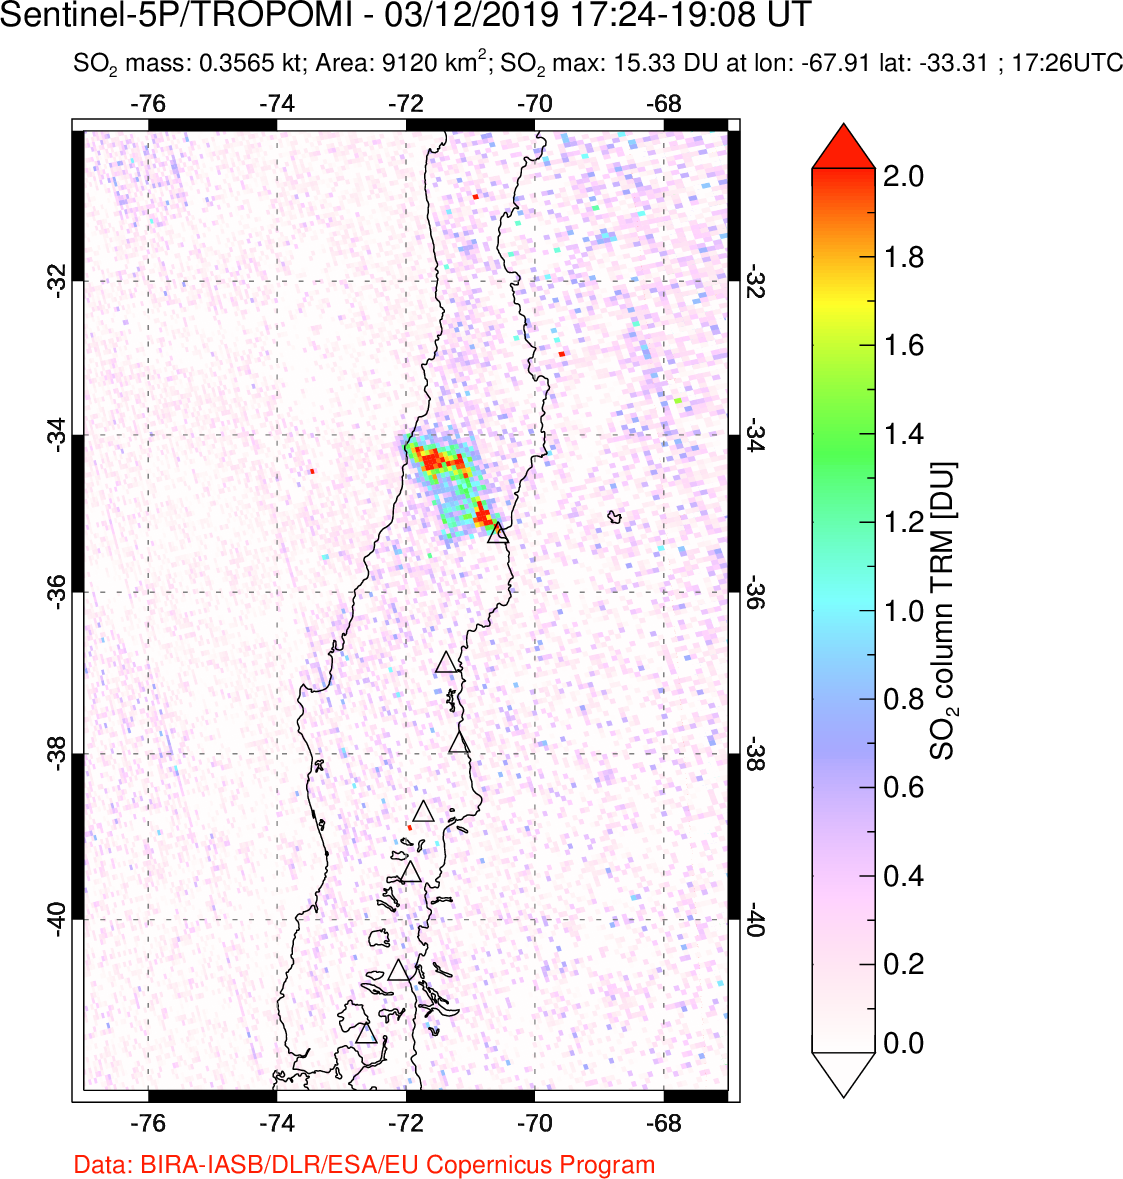 A sulfur dioxide image over Central Chile on Mar 12, 2019.